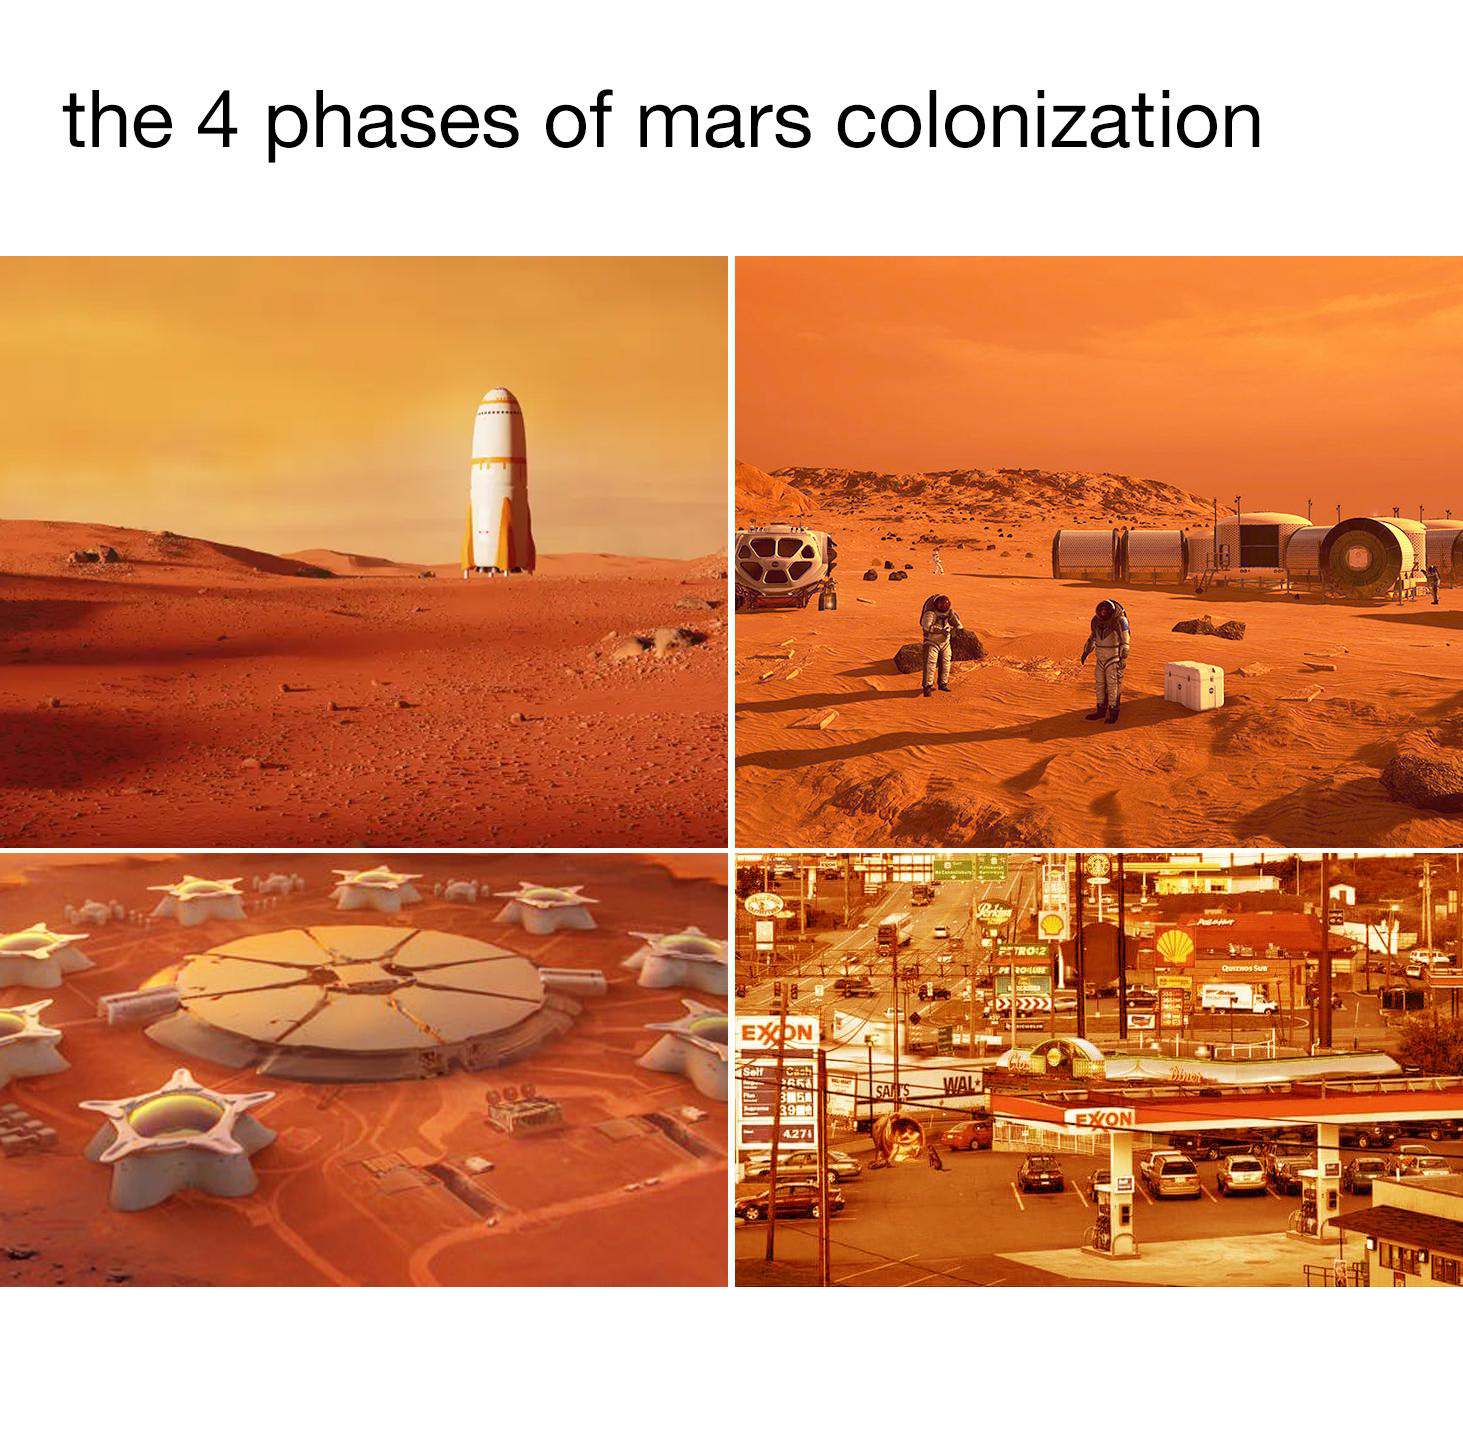 Funny and memes - heat - the 4 phases of mars colonization Exon